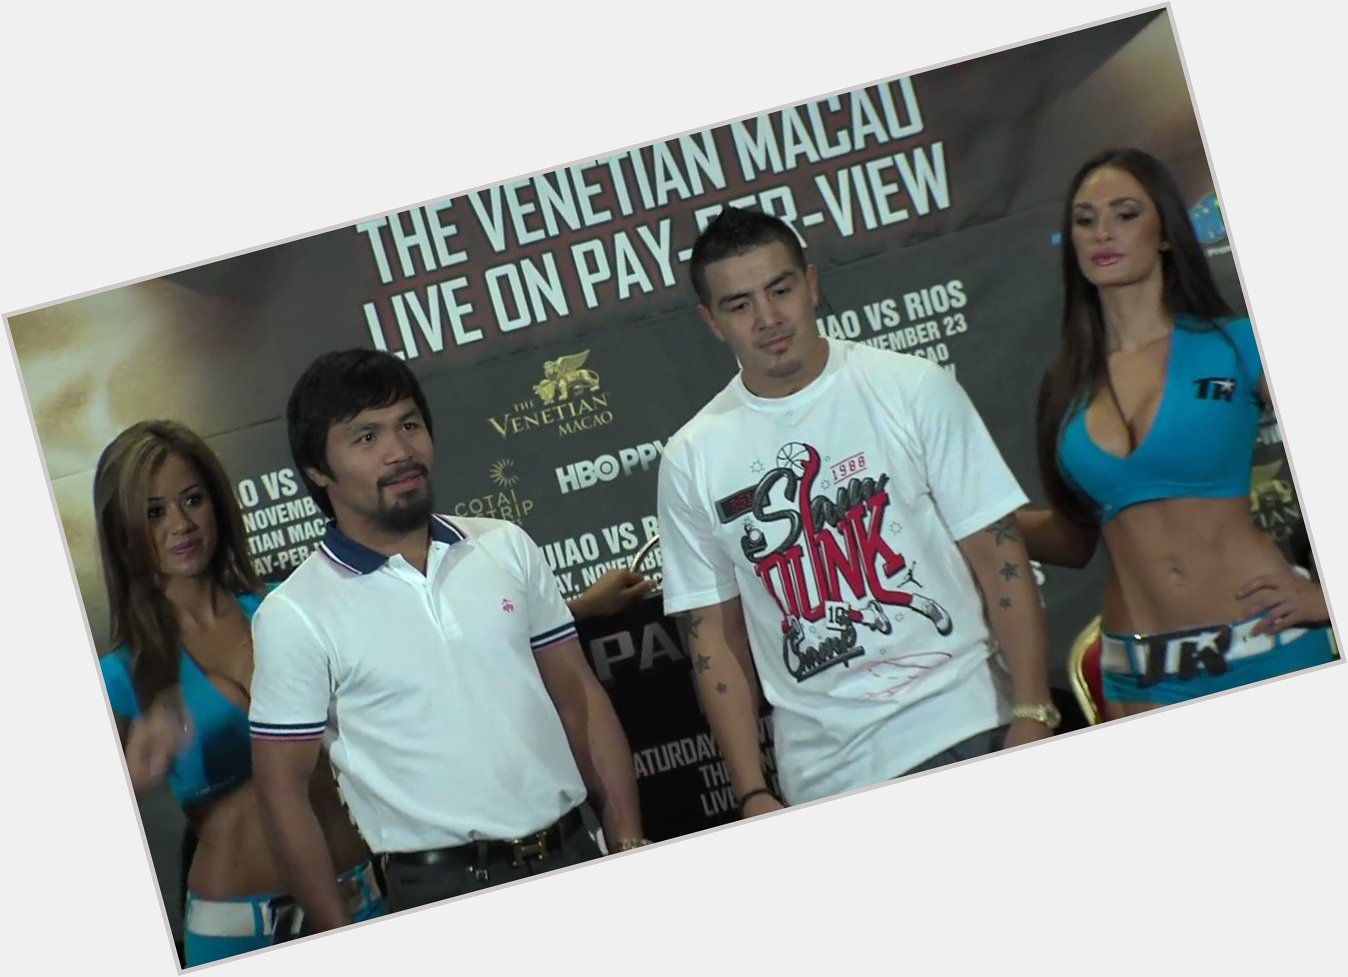 Manny Pacquiao vs. Brandon Rios: Face-off Happy Birthday HE\S GREAT INSIDE & OUT THE RING 